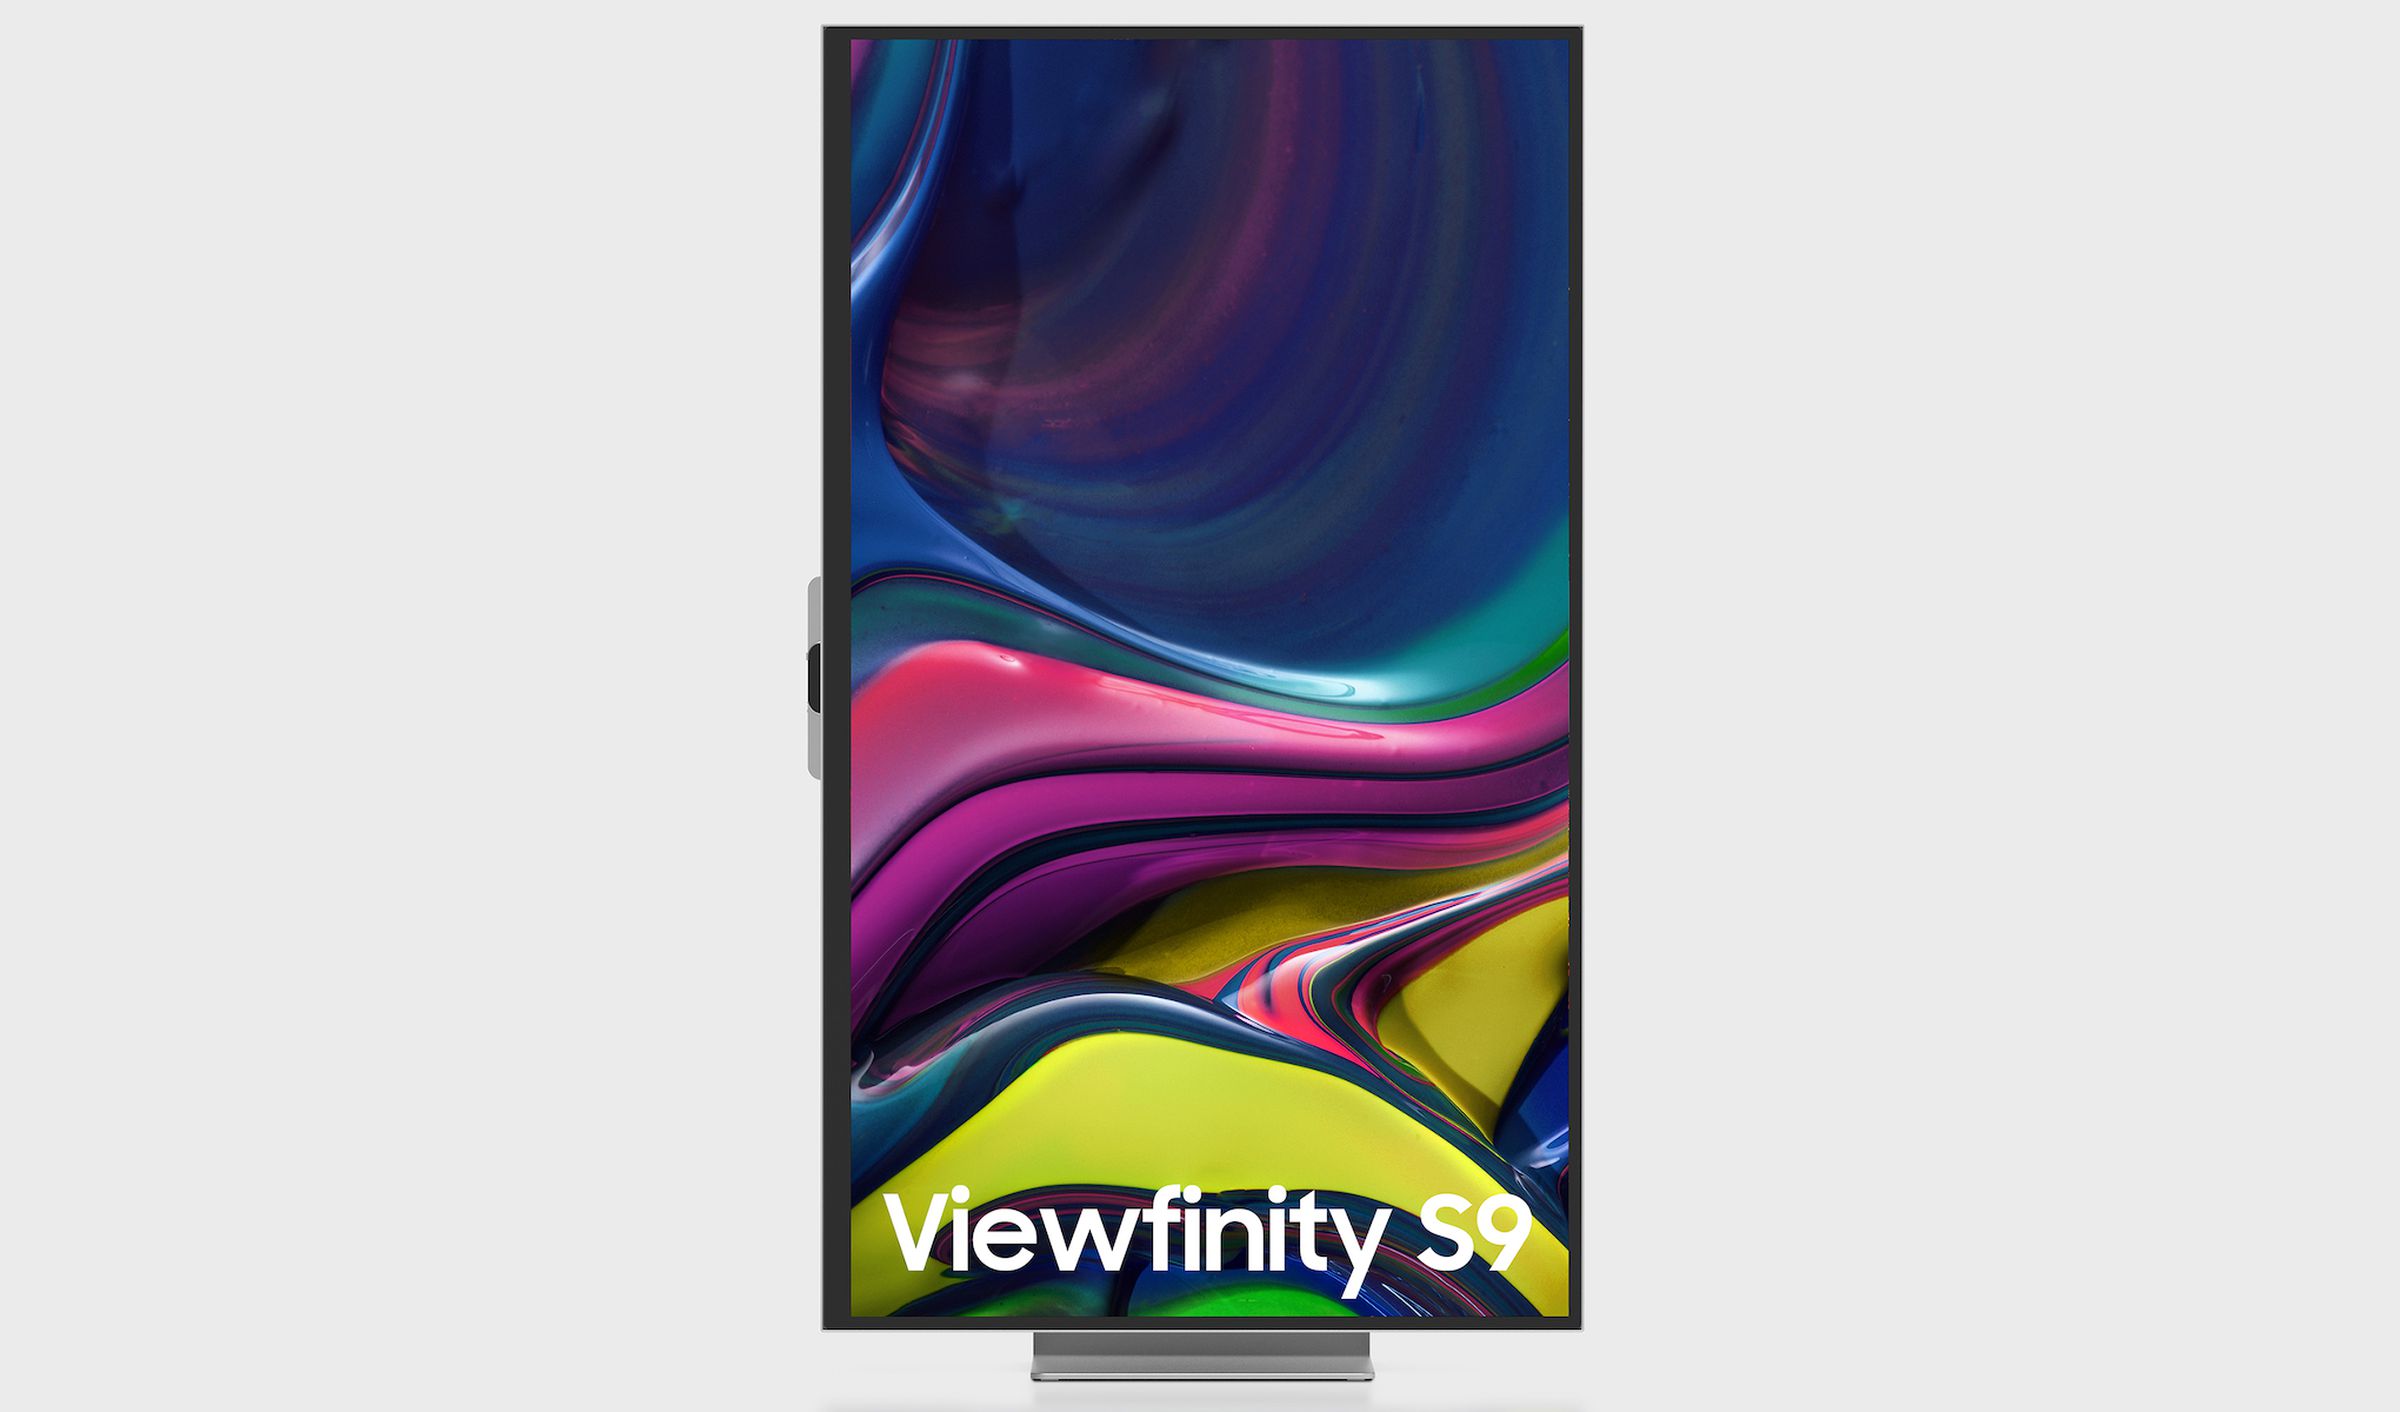 An image of the Samsung ViewFinity S9 monitor in its portrait orientation.